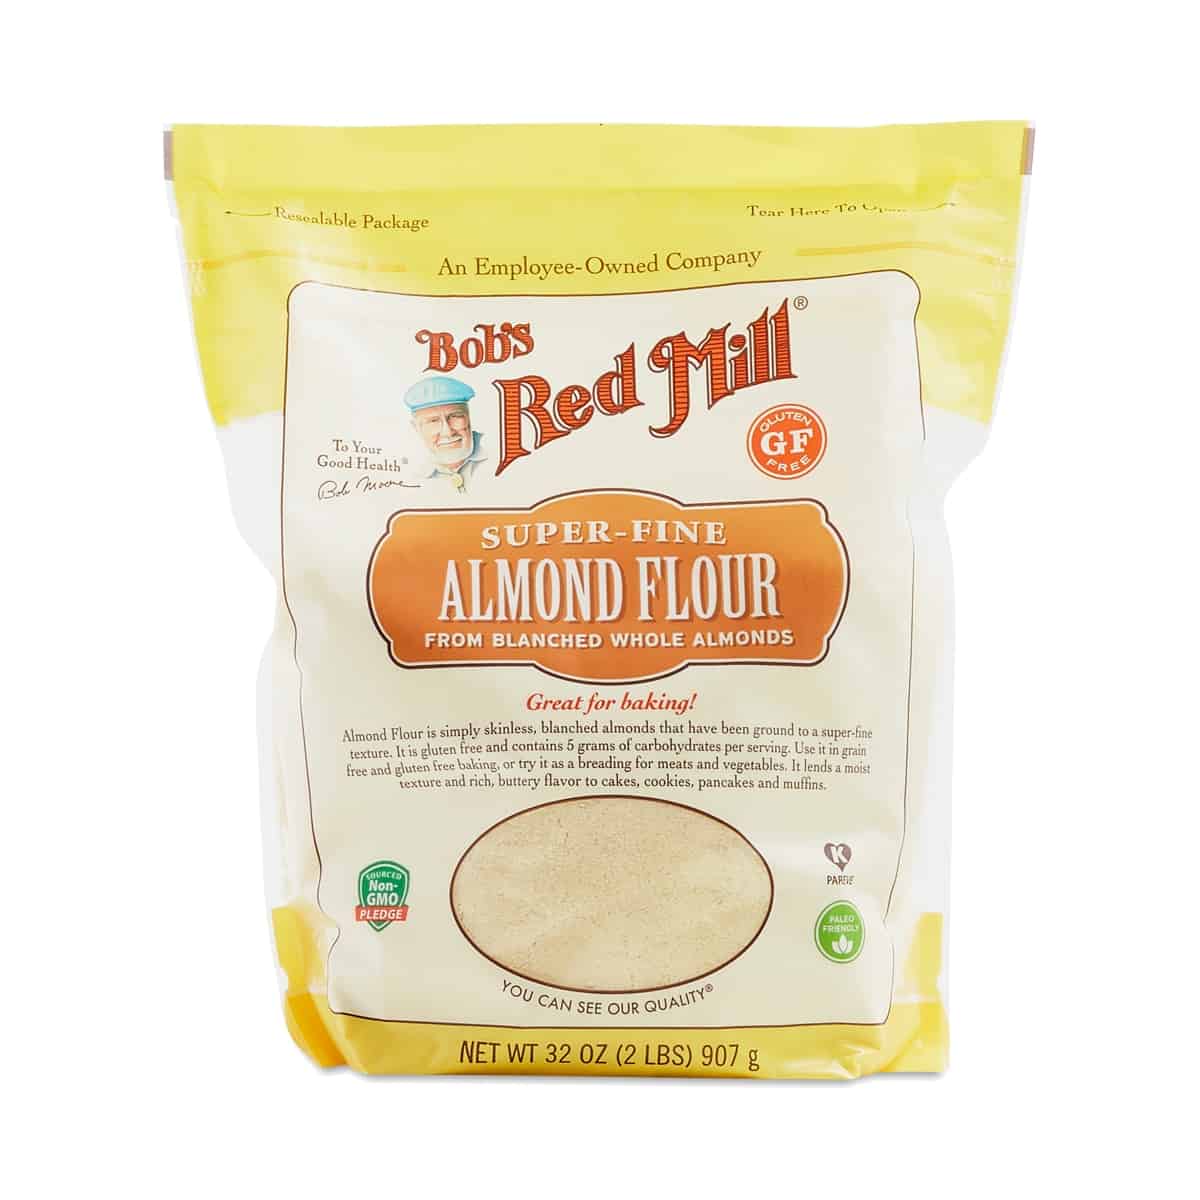 Package of almond flour.